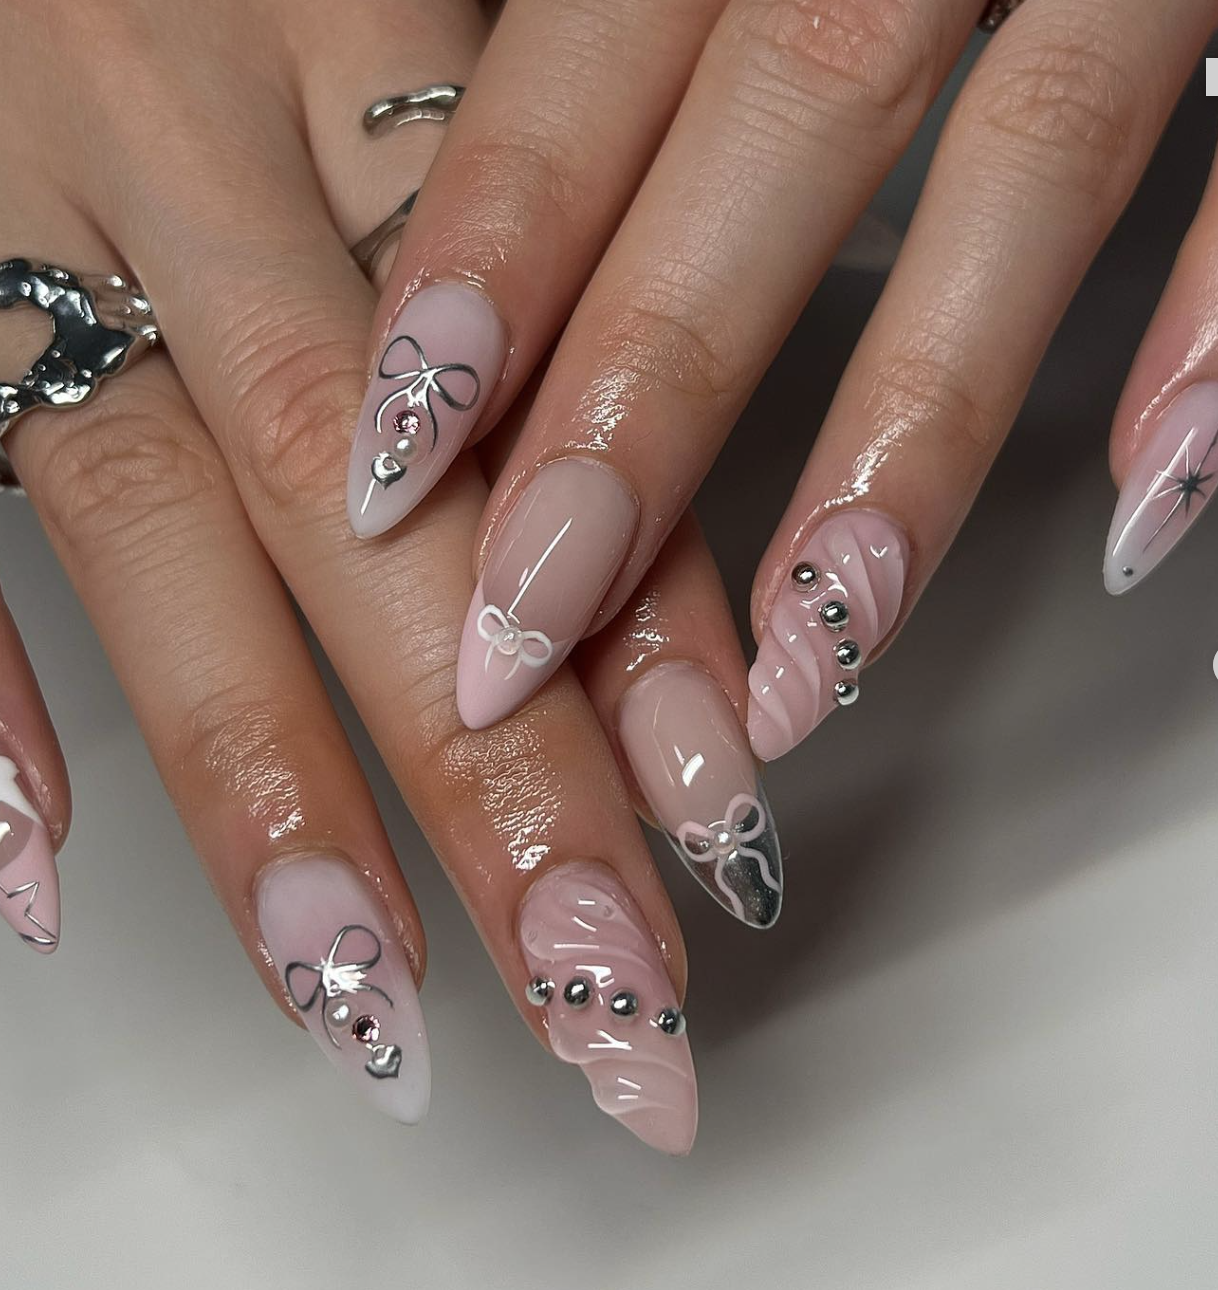 Blush Nails Are the Latest Nail Trend that Everyone Is Obsessed With